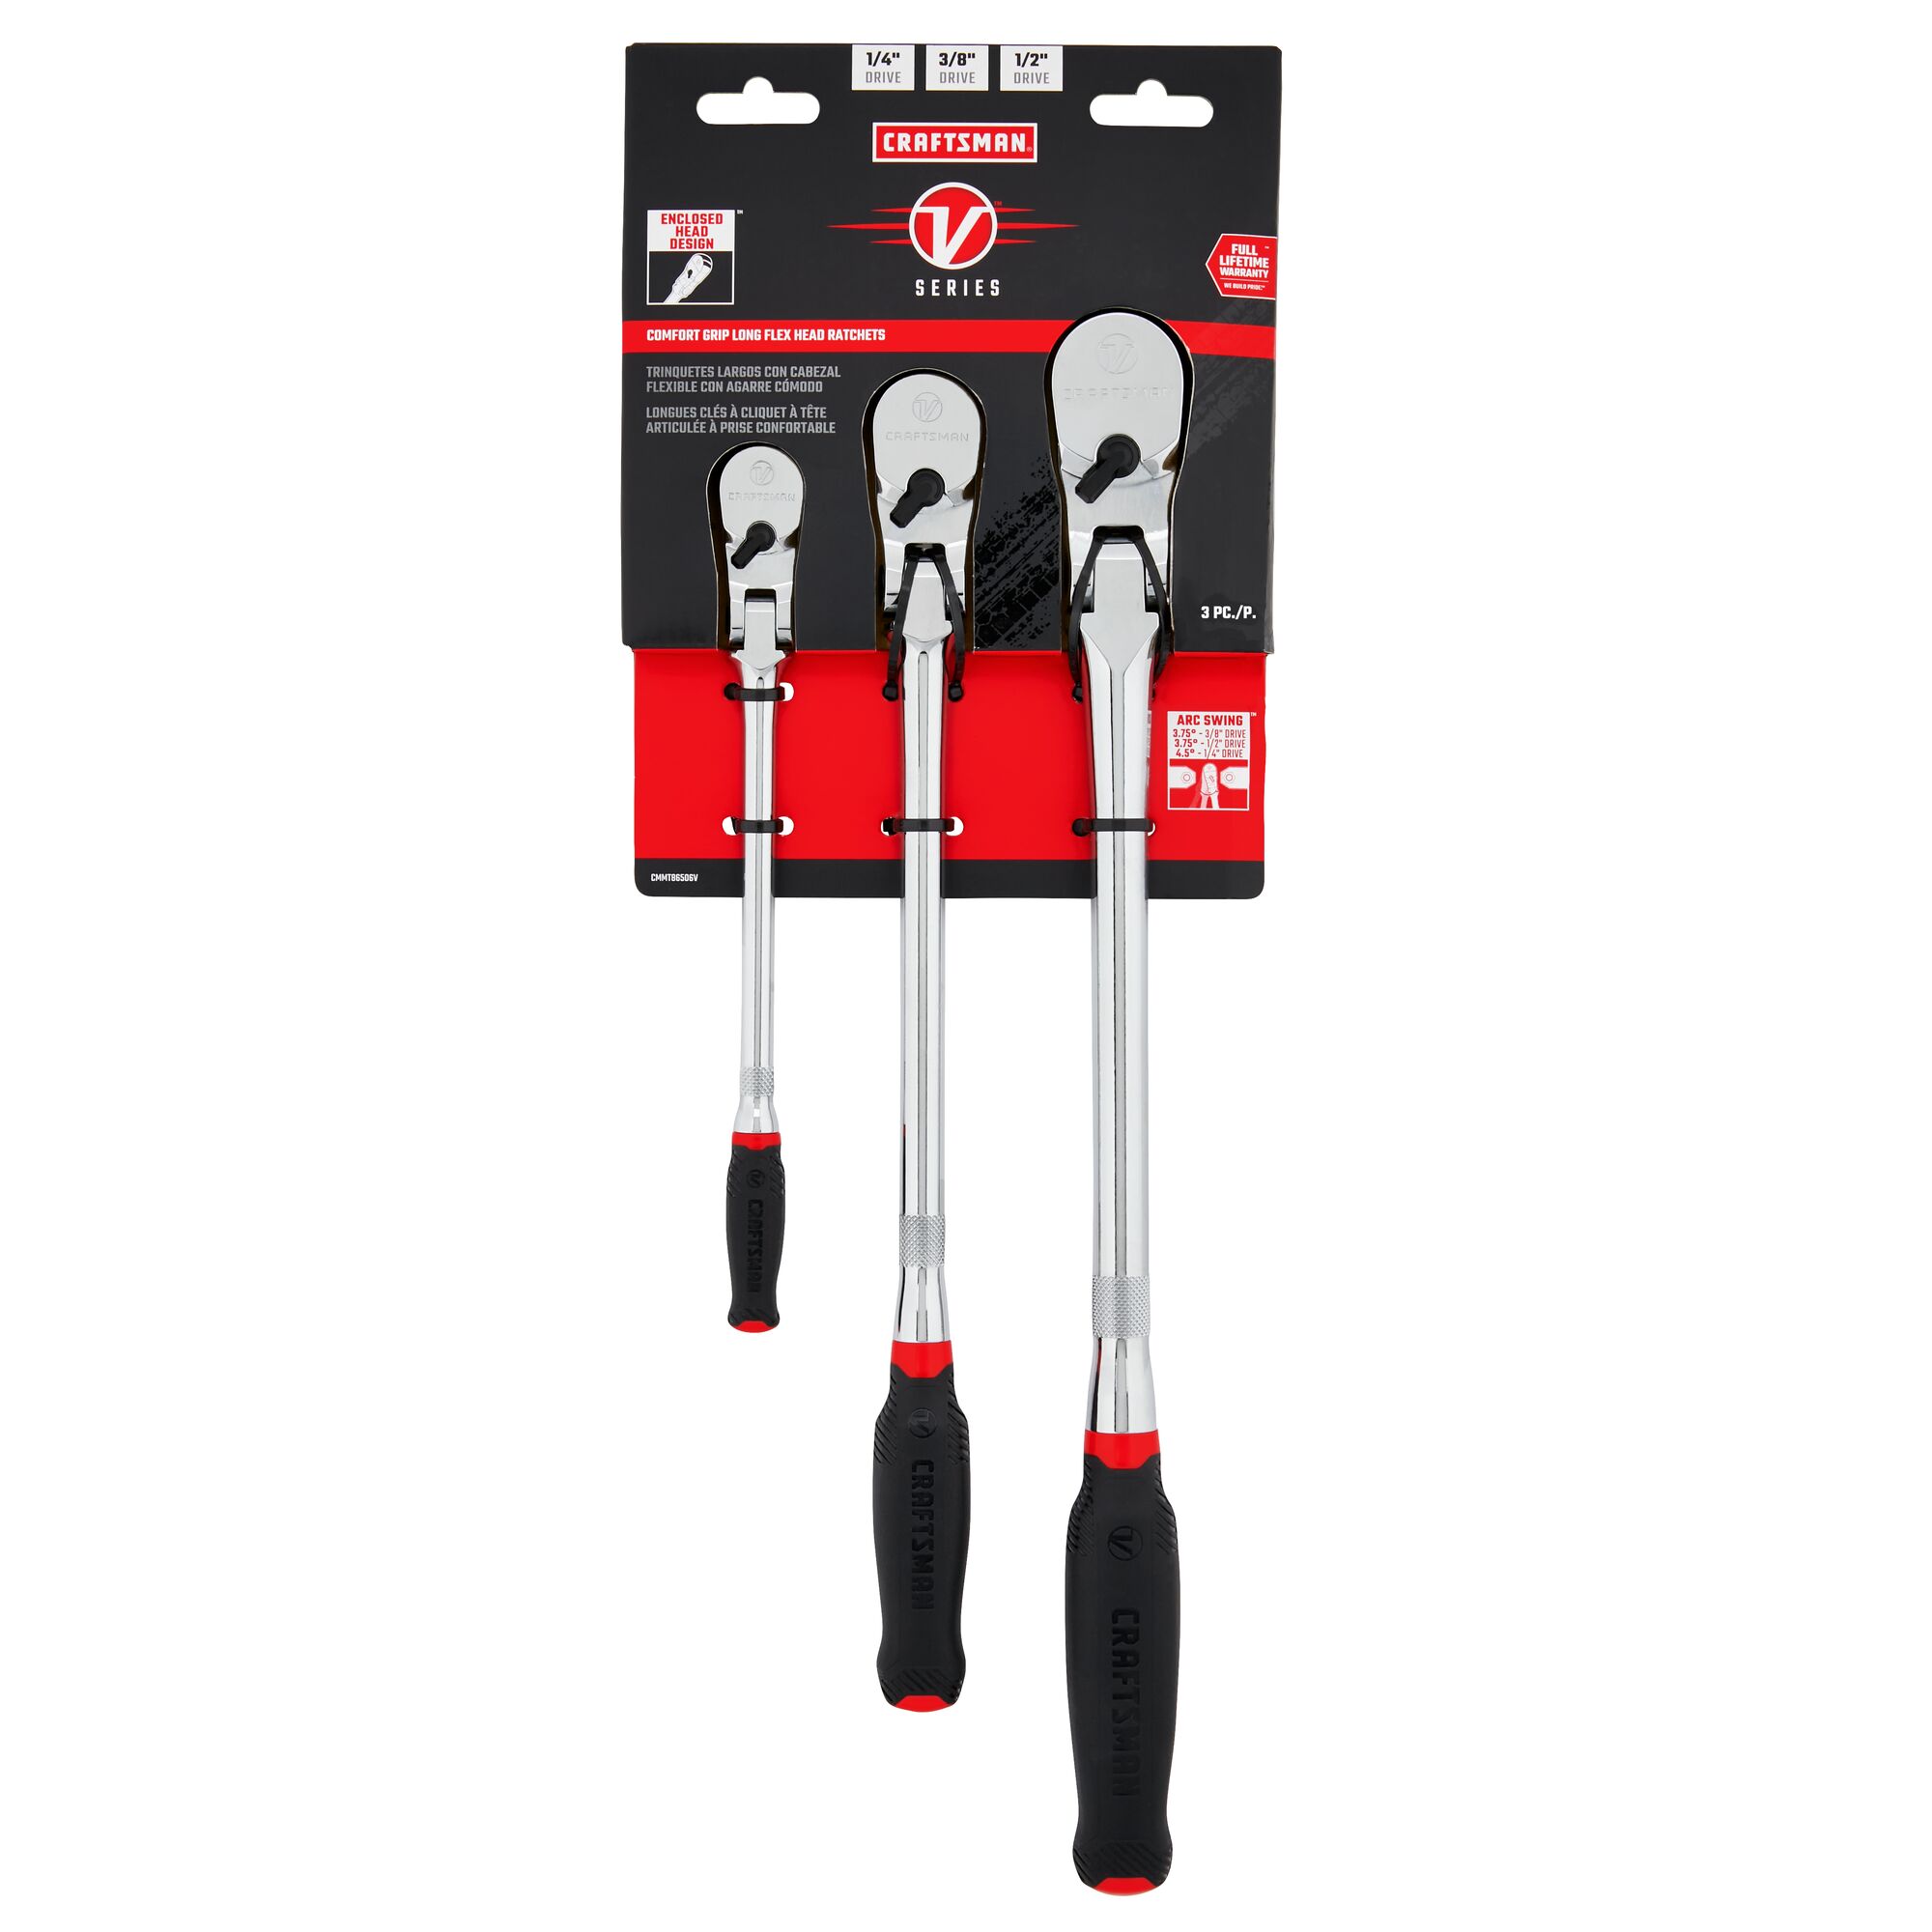 V series quarter inch three eighth inch and half inch drive comfort grip long flex head ratchet in packaging. 3 pack